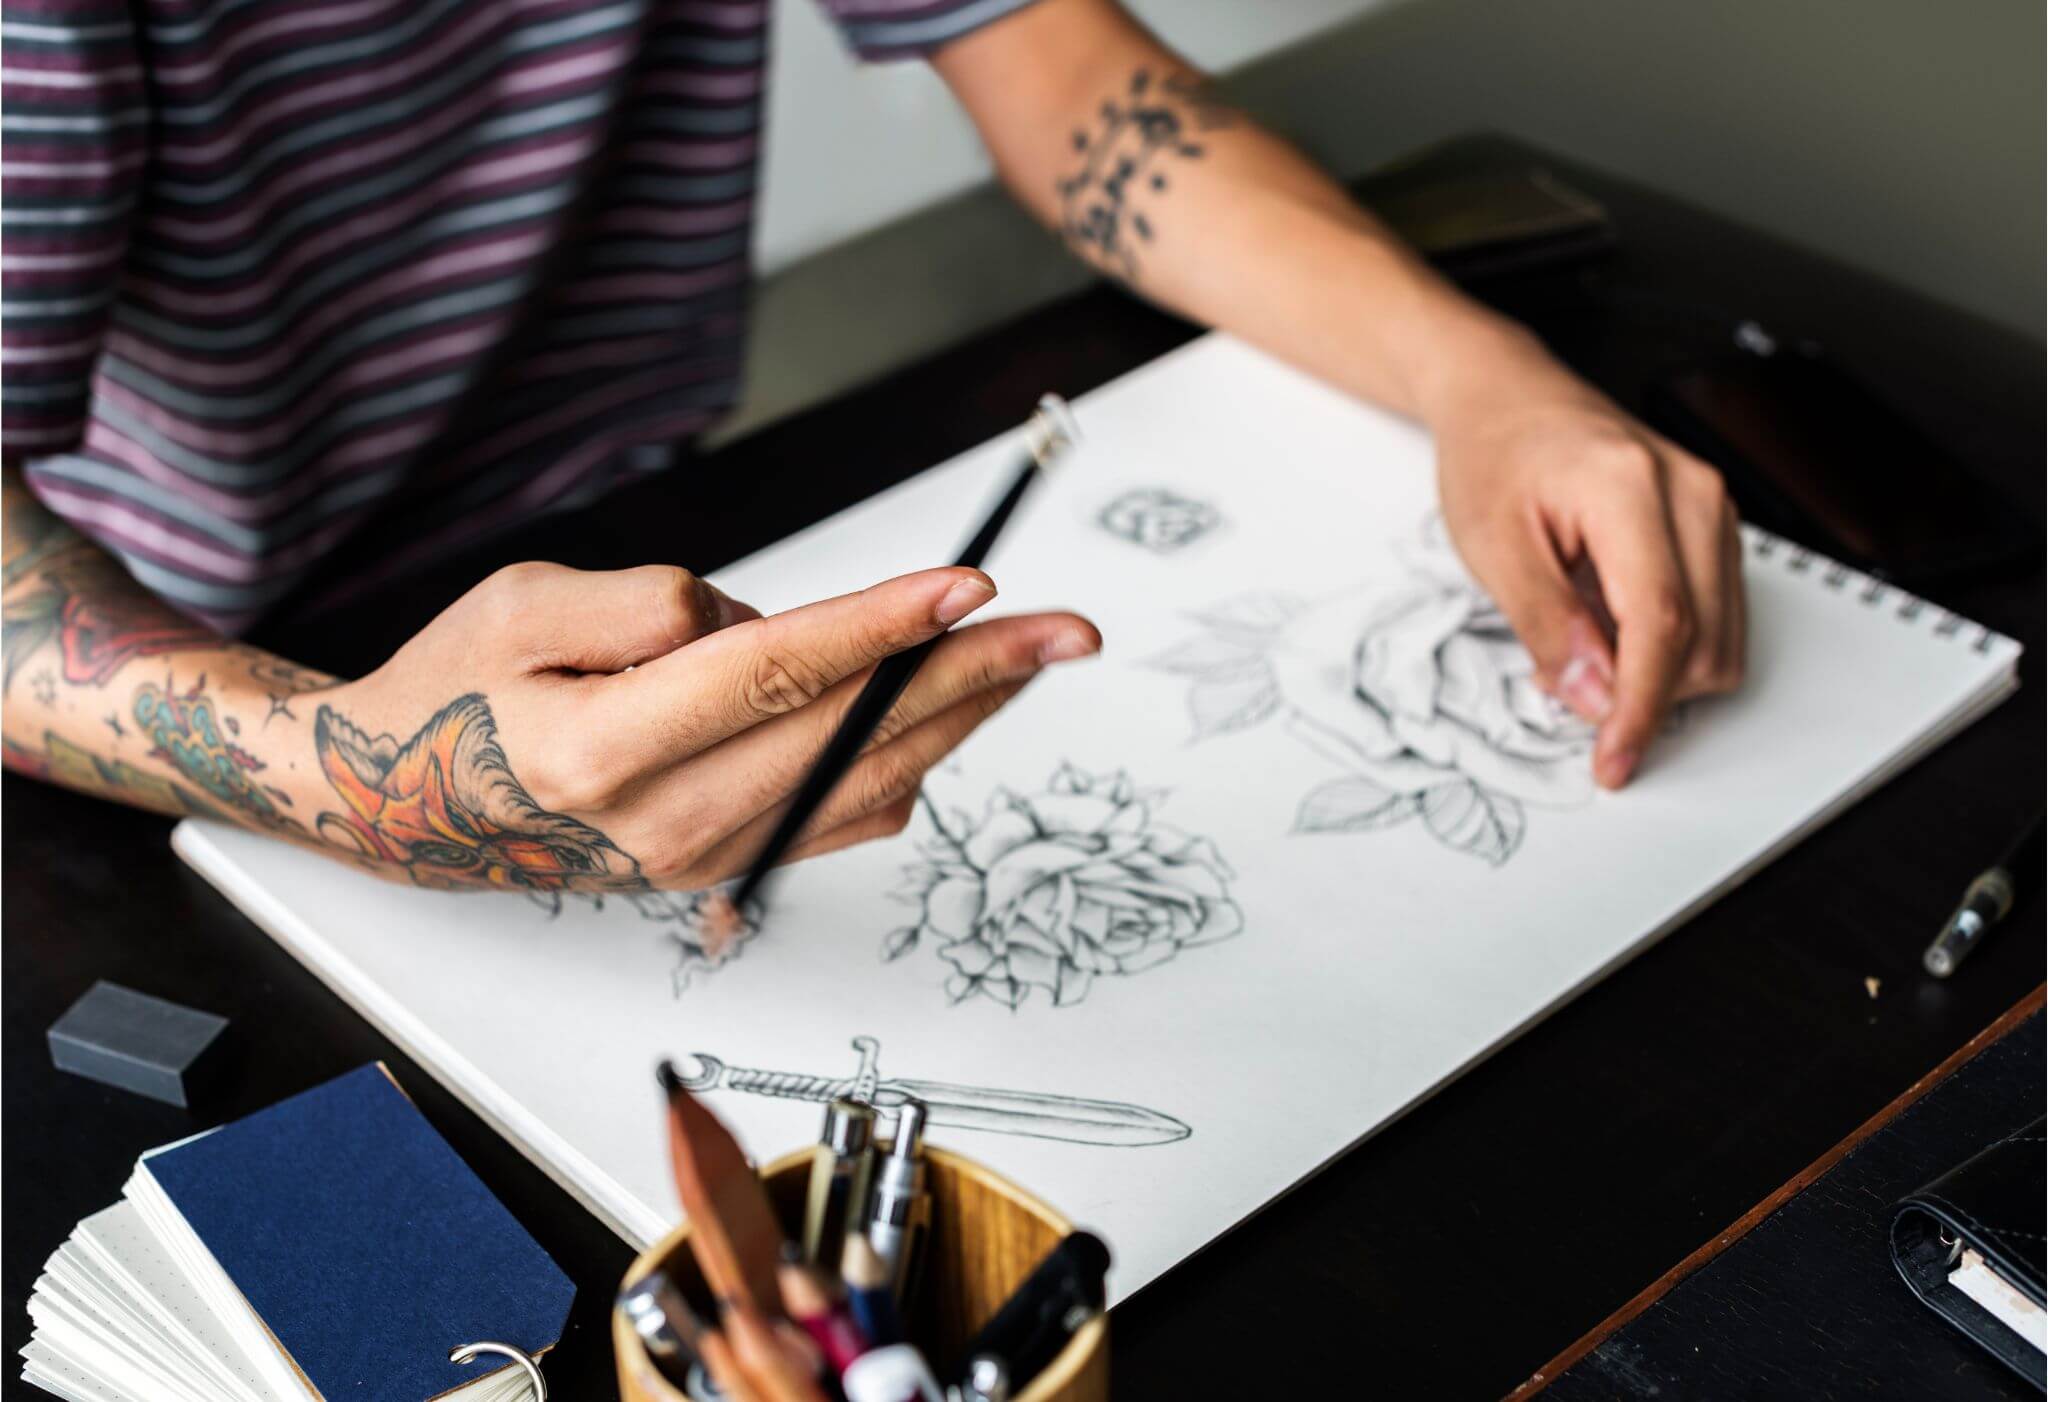 5 Things to Consider When Designing a Temporary Tattoo